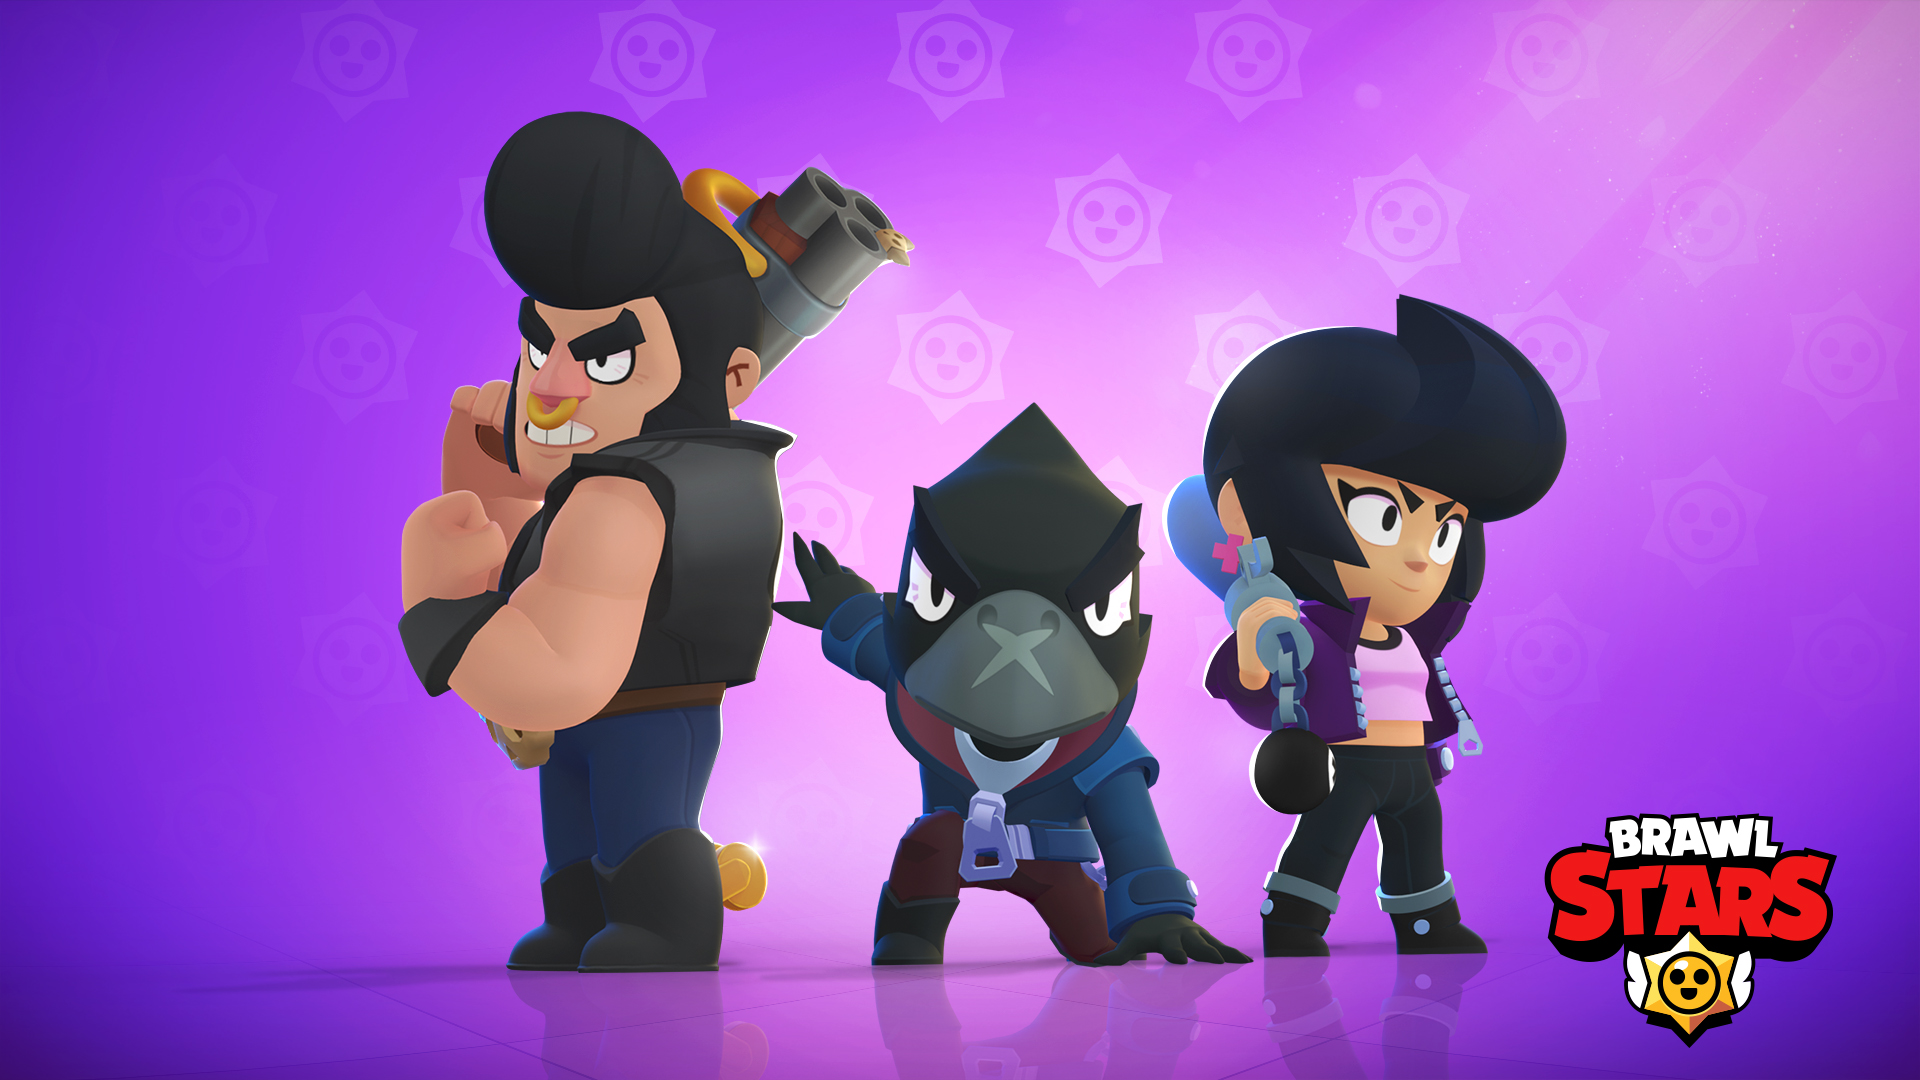 Brawl Stars Sur Twitter We Know Playing With Randoms Can Be Tough Sometimes So How About Trying Something Different Today Comment Below 1 Your Total Trophies 2 - brawl stars kein internet probleme